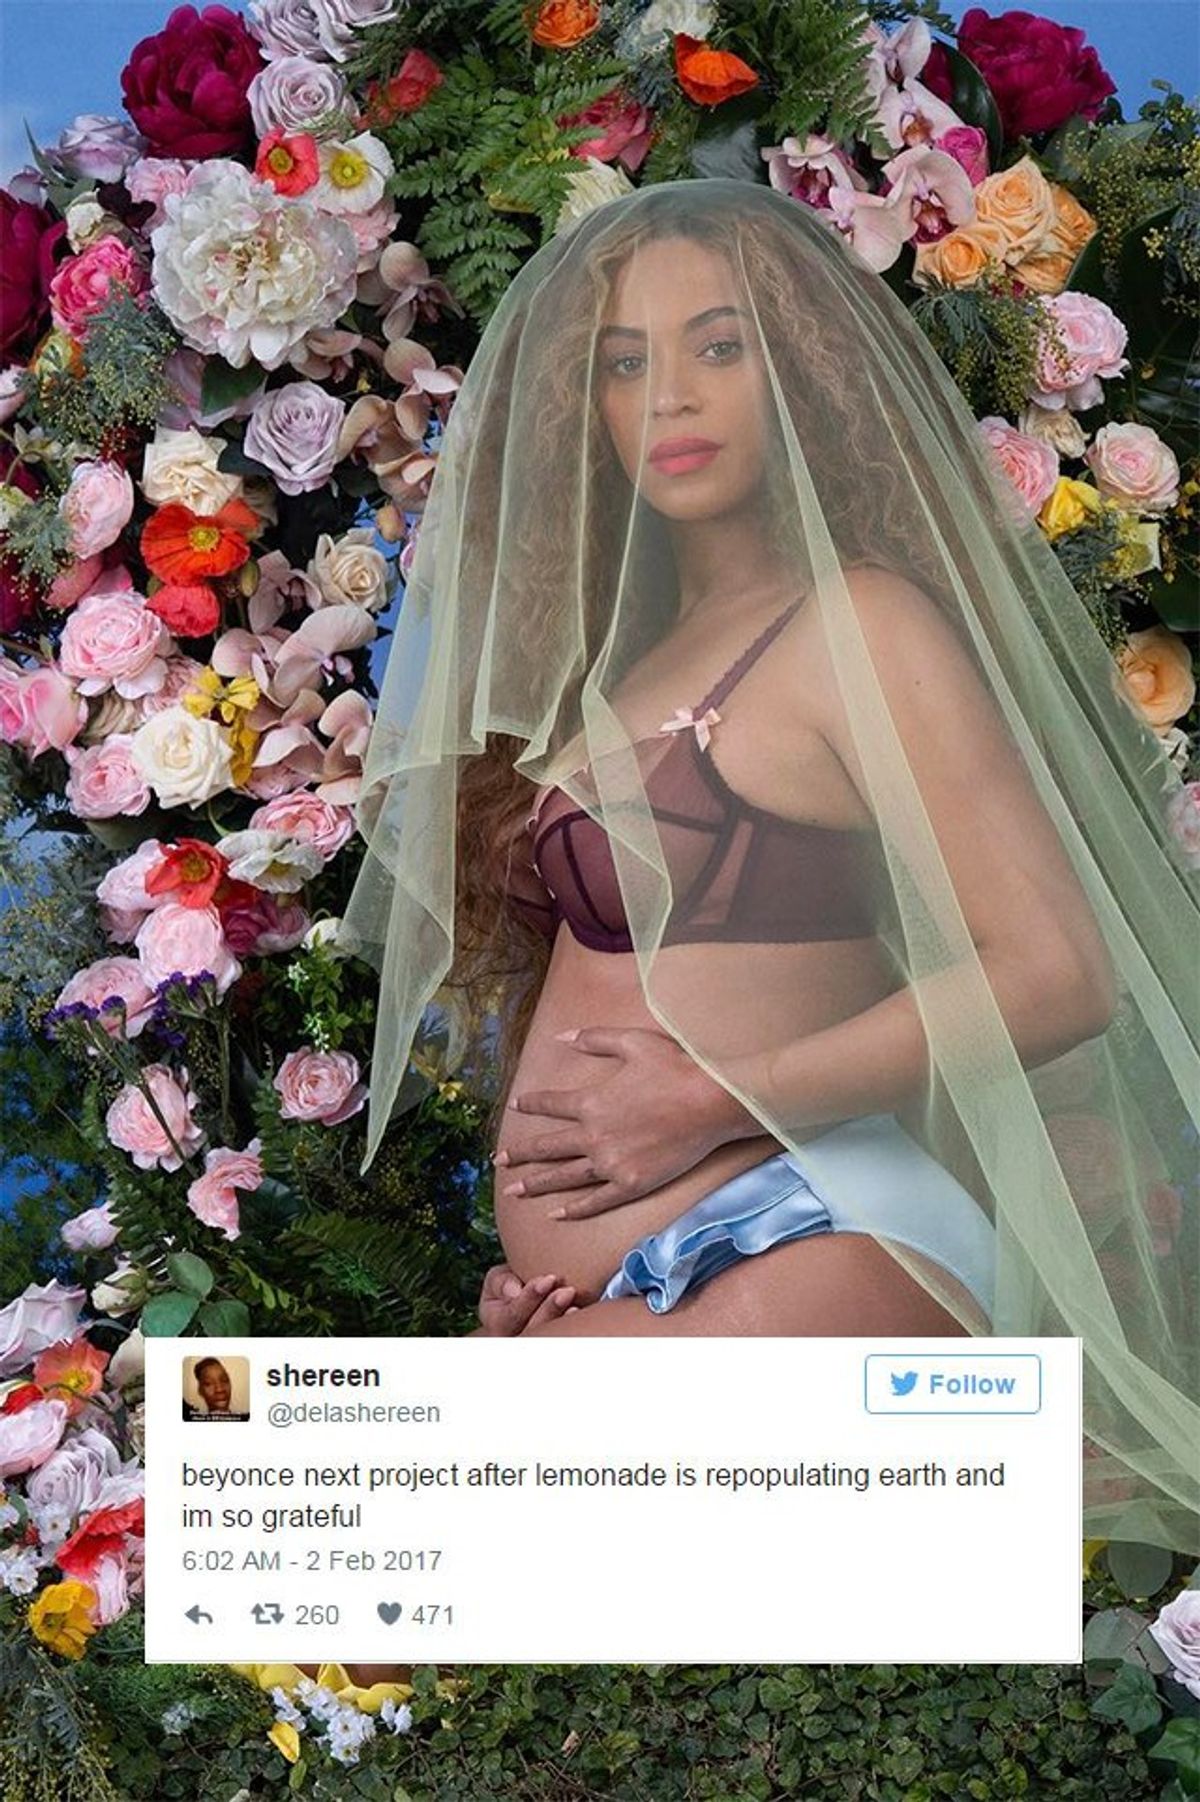 Some Reactions To Beyonce's News About Having Twins